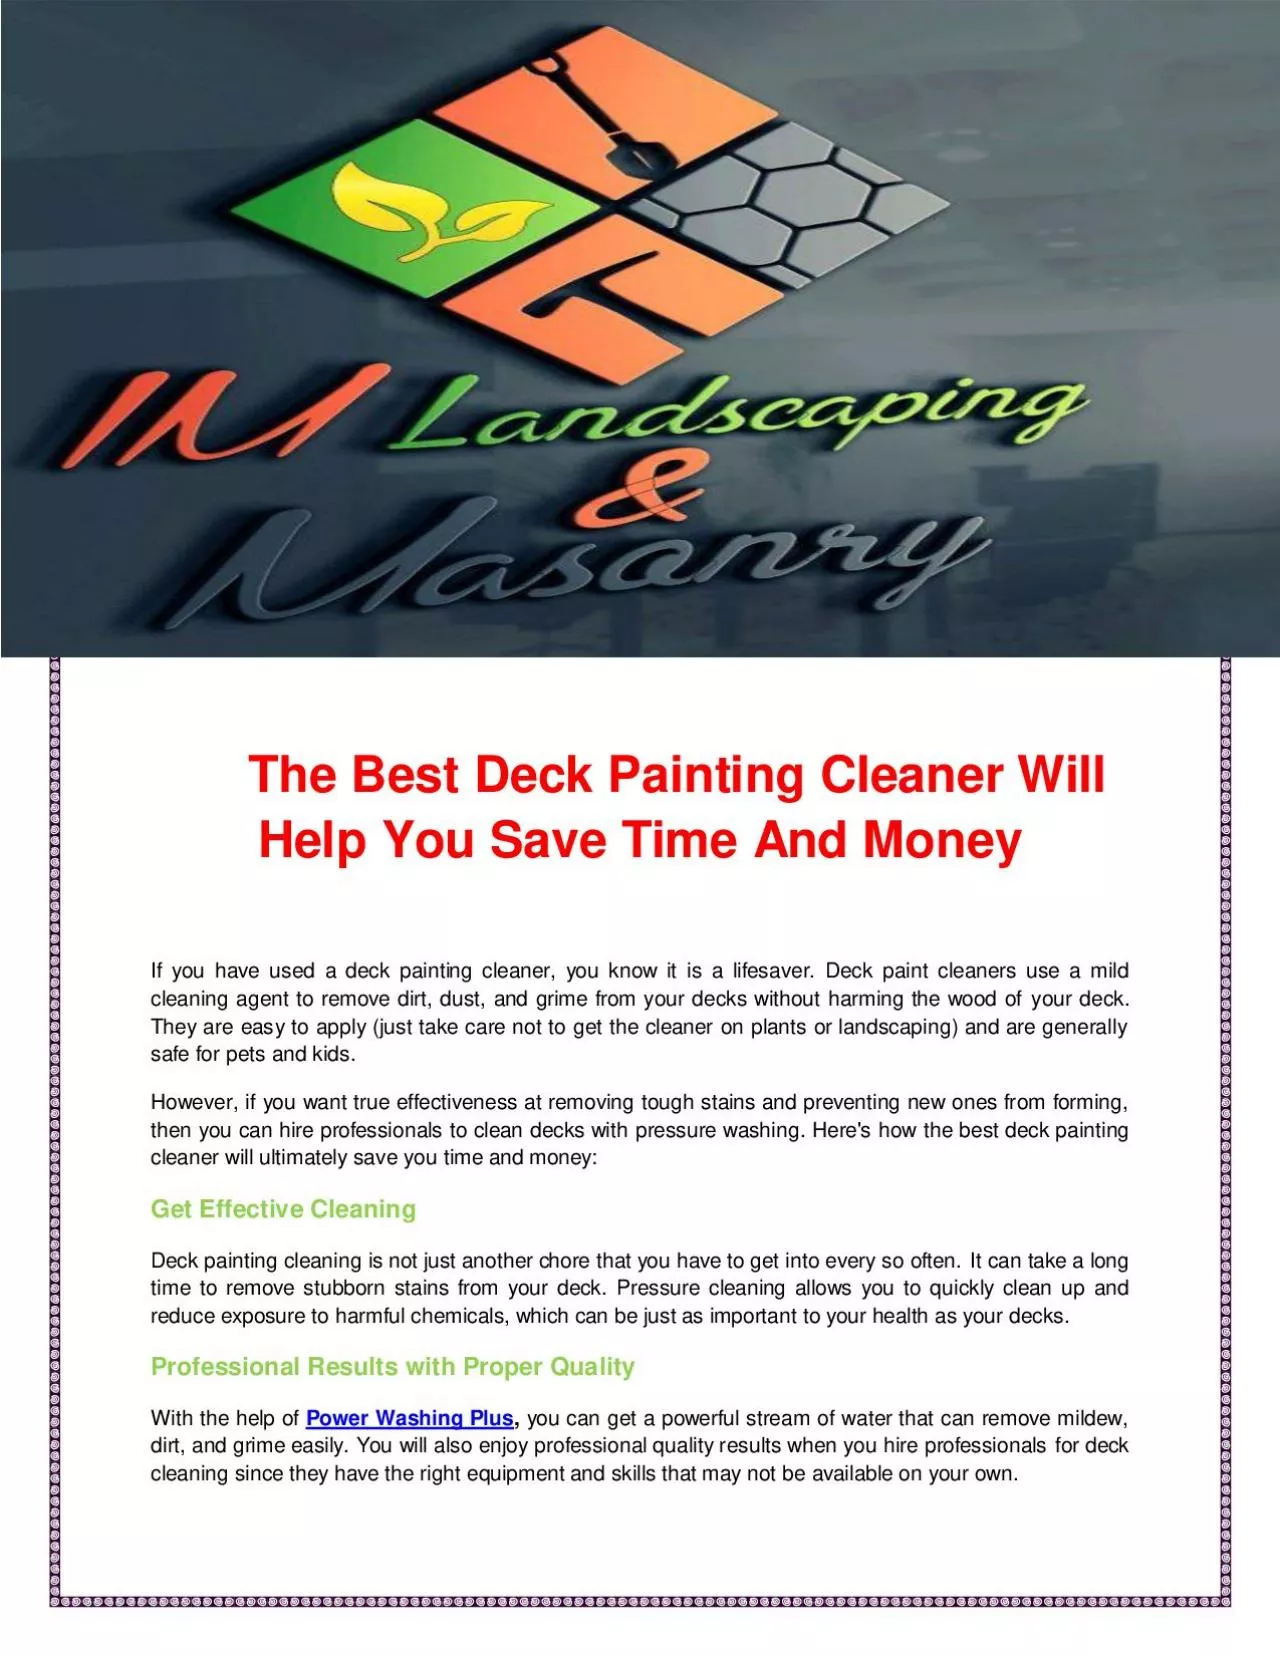 The Best Deck Painting Cleaner Will Help You Save Time And Money